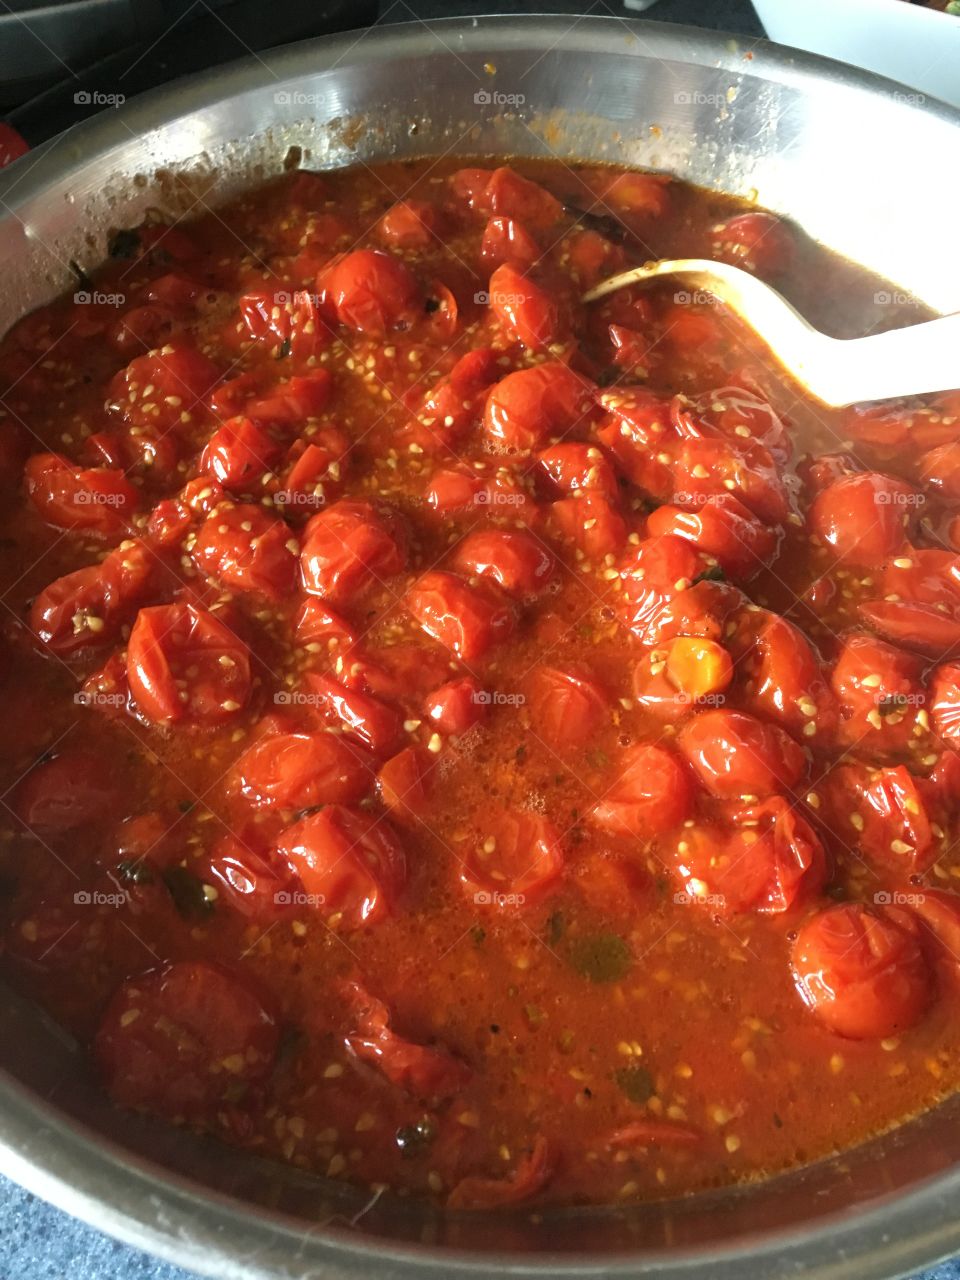 Cooking tomato sauce 